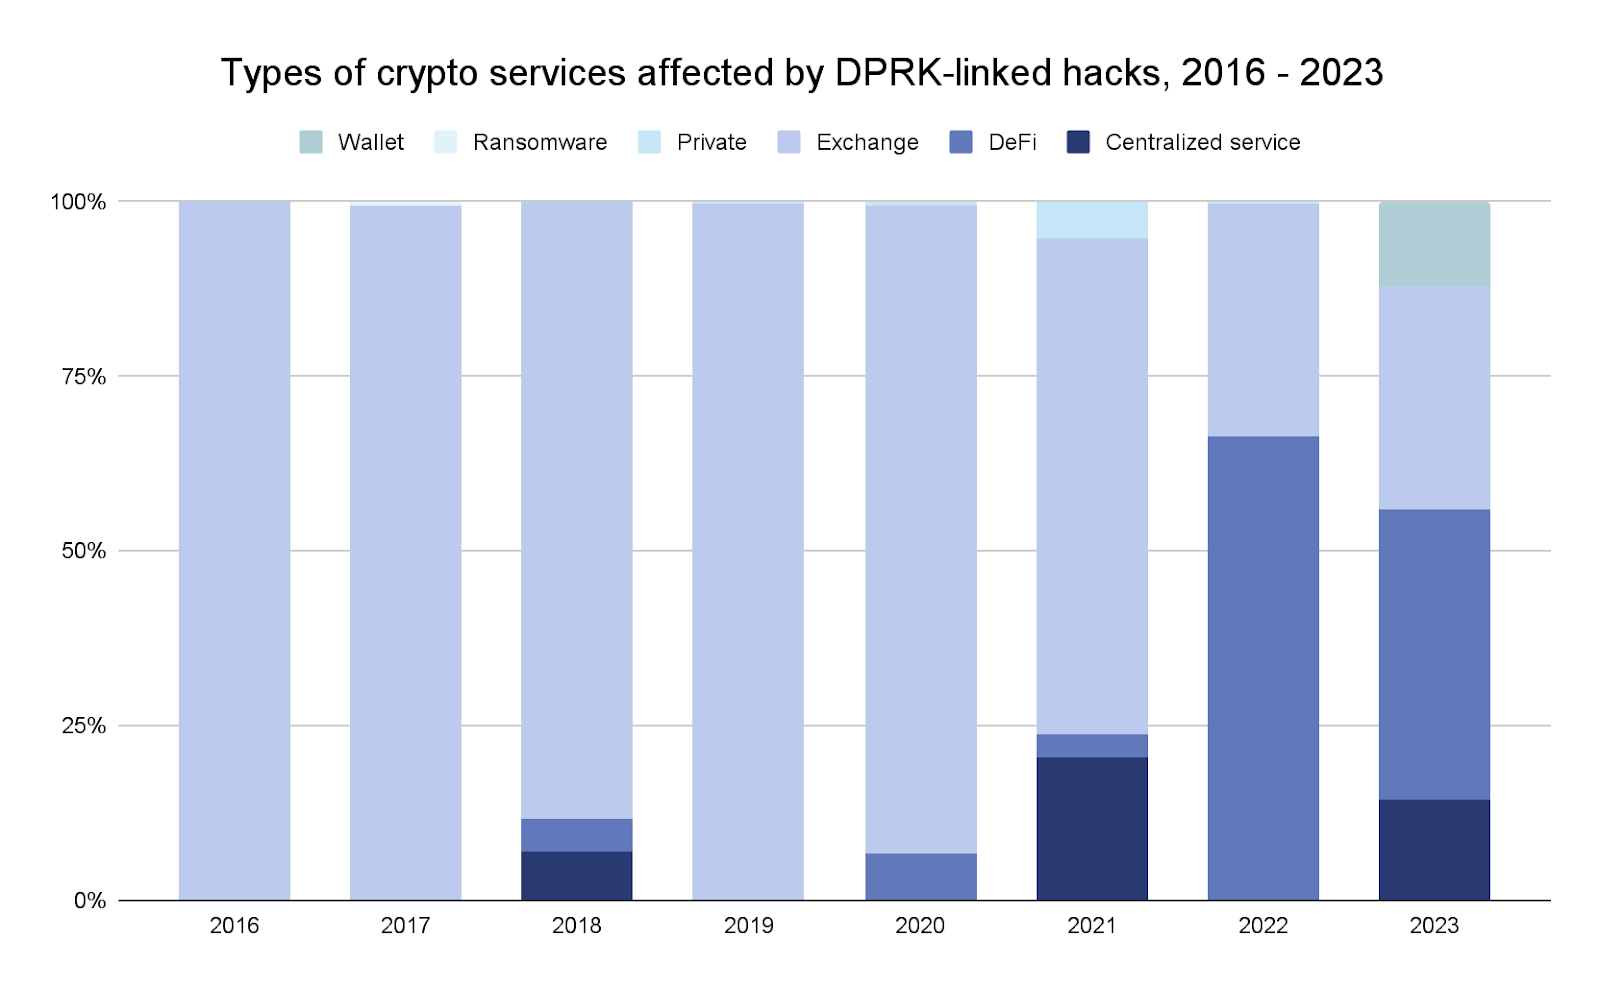 Types of crypto services affected by North Korean hacks